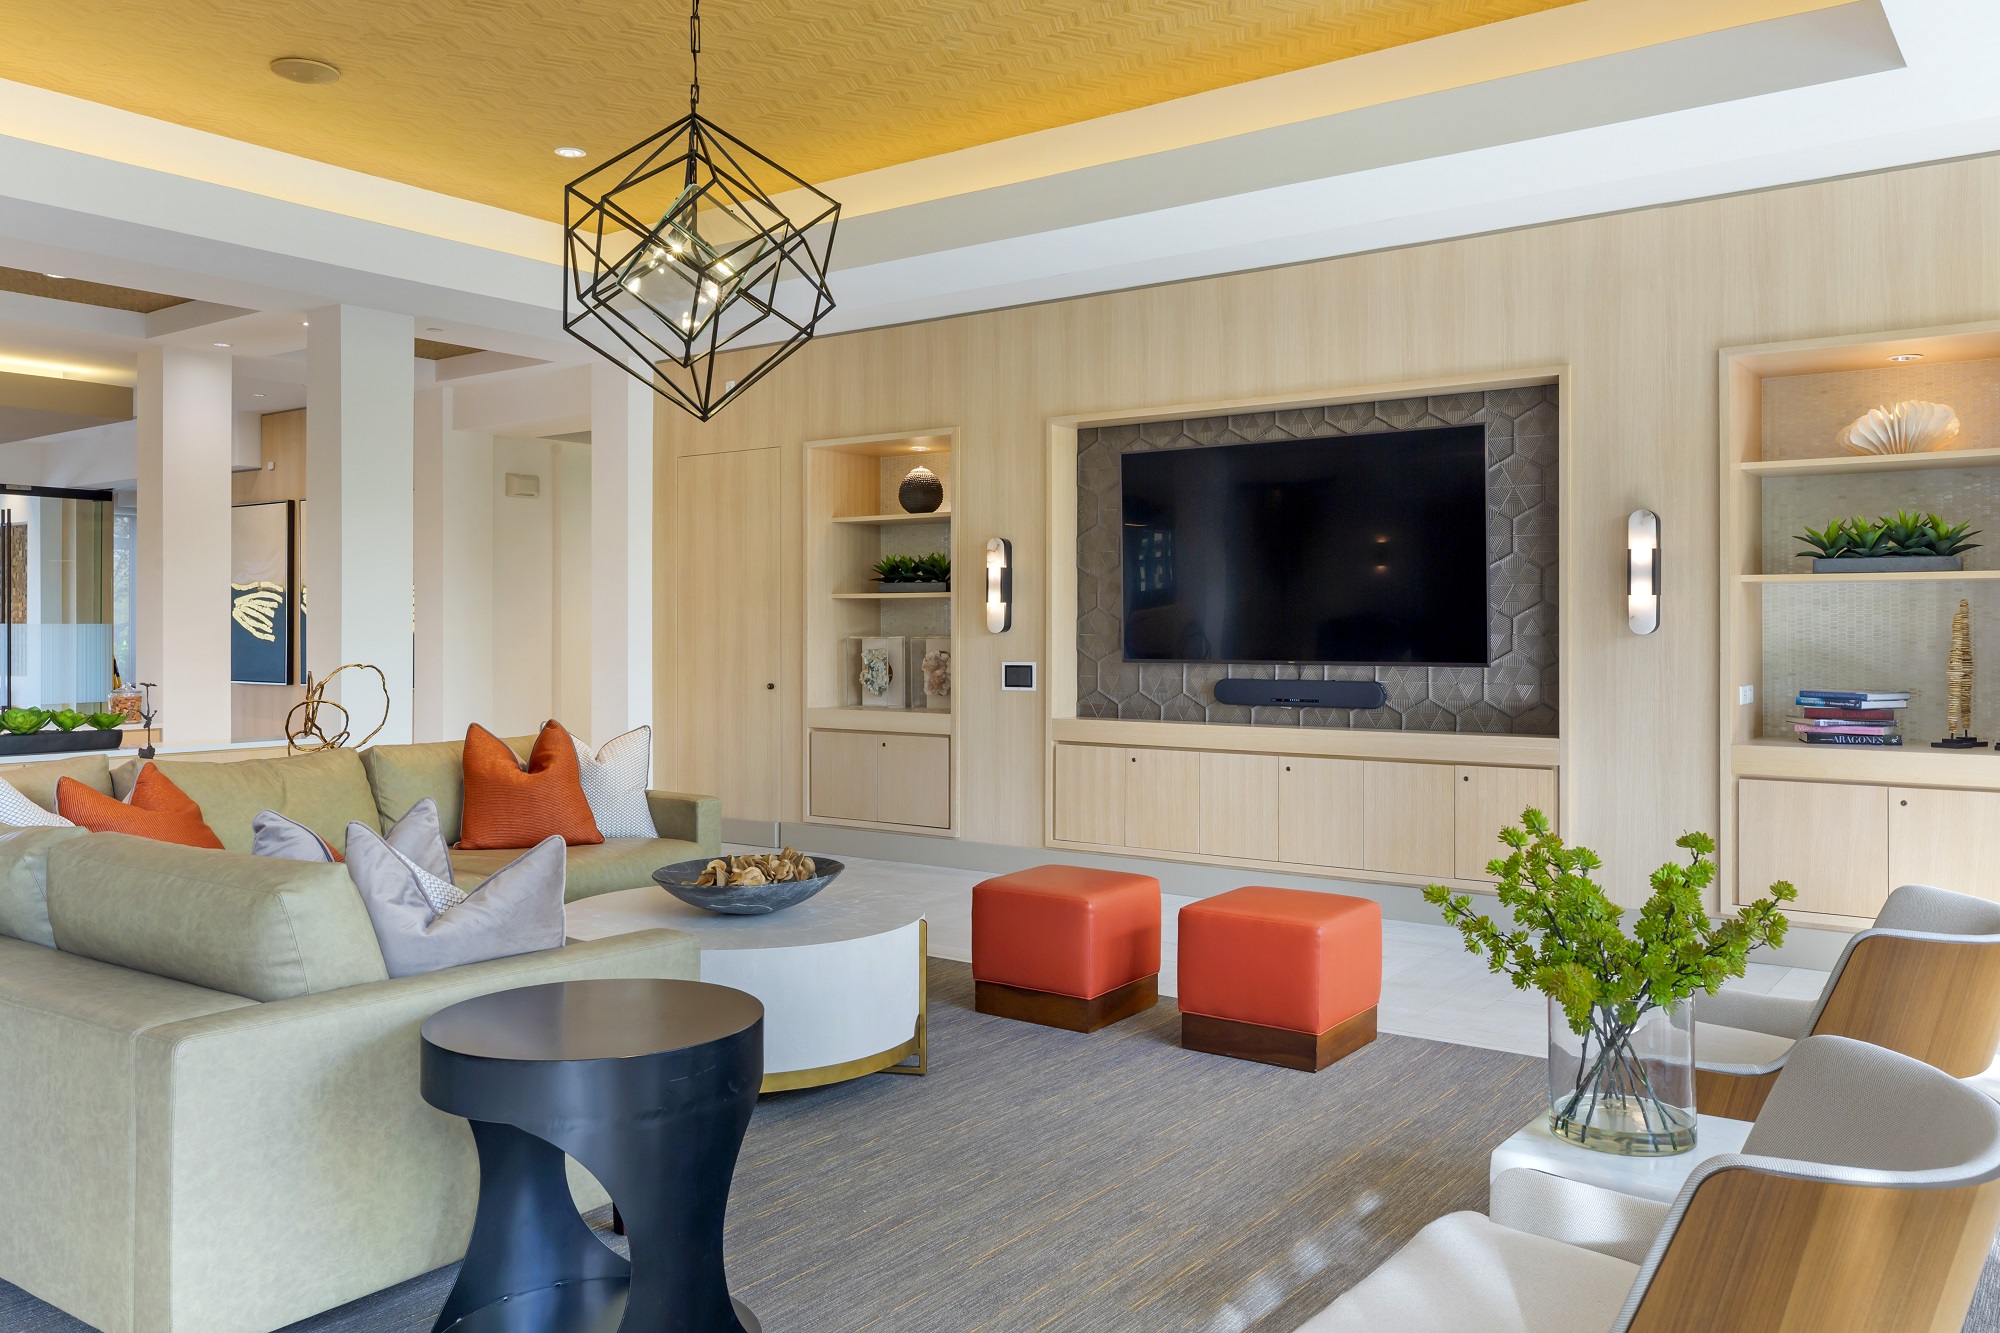 Clubhouse with variety of seating, designer lighting, large flat screen TV, and tile flooring